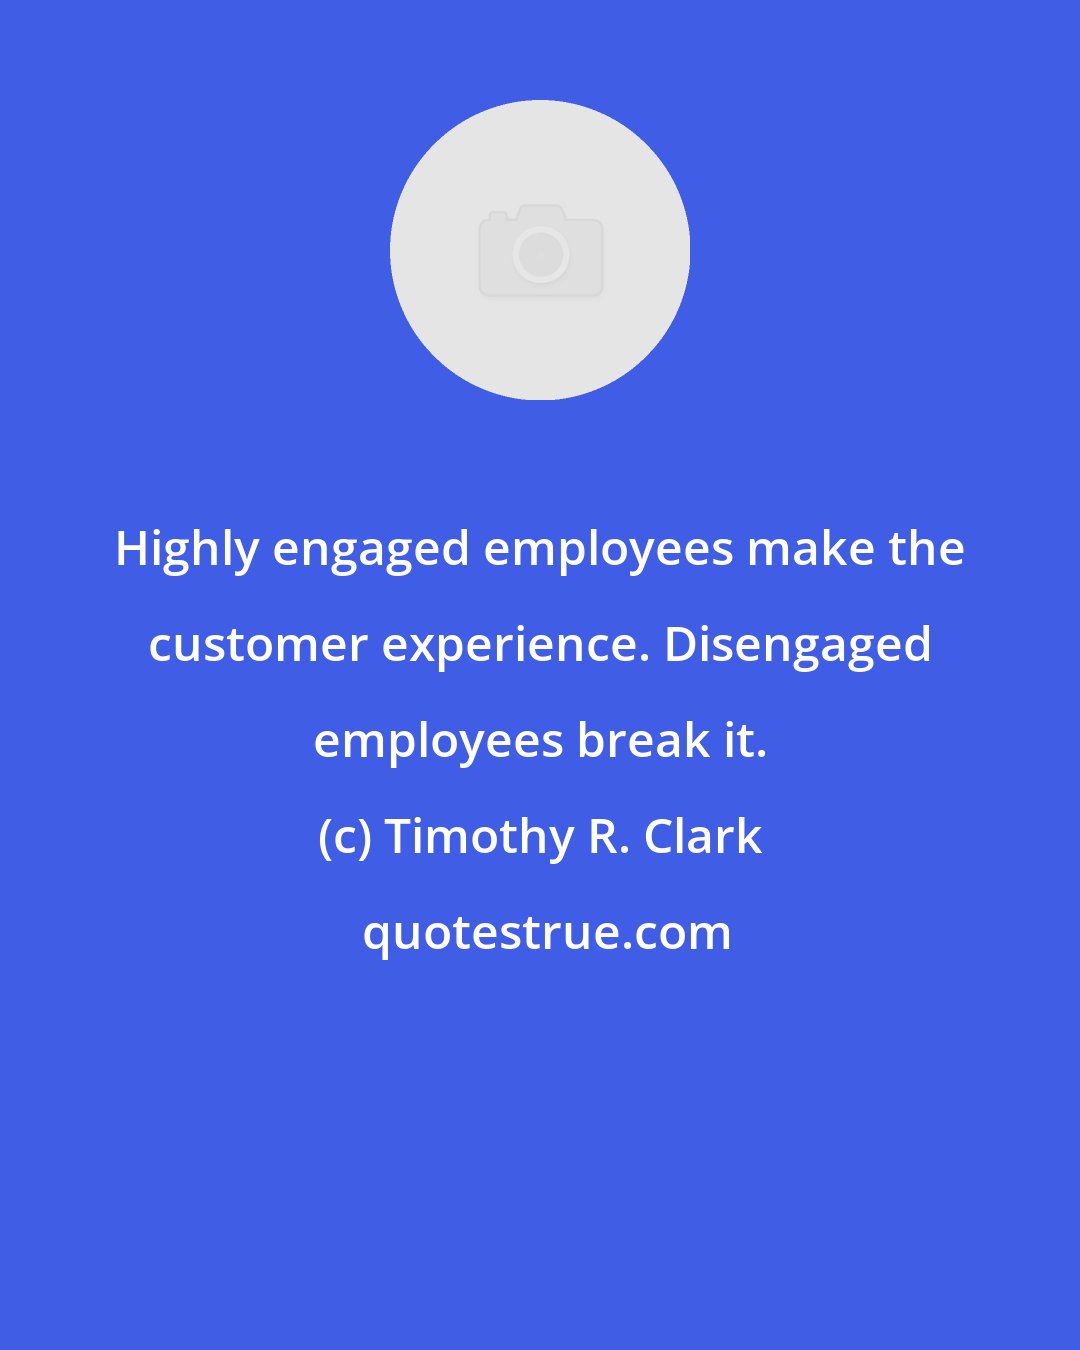 Timothy R. Clark: Highly engaged employees make the customer experience. Disengaged employees break it.